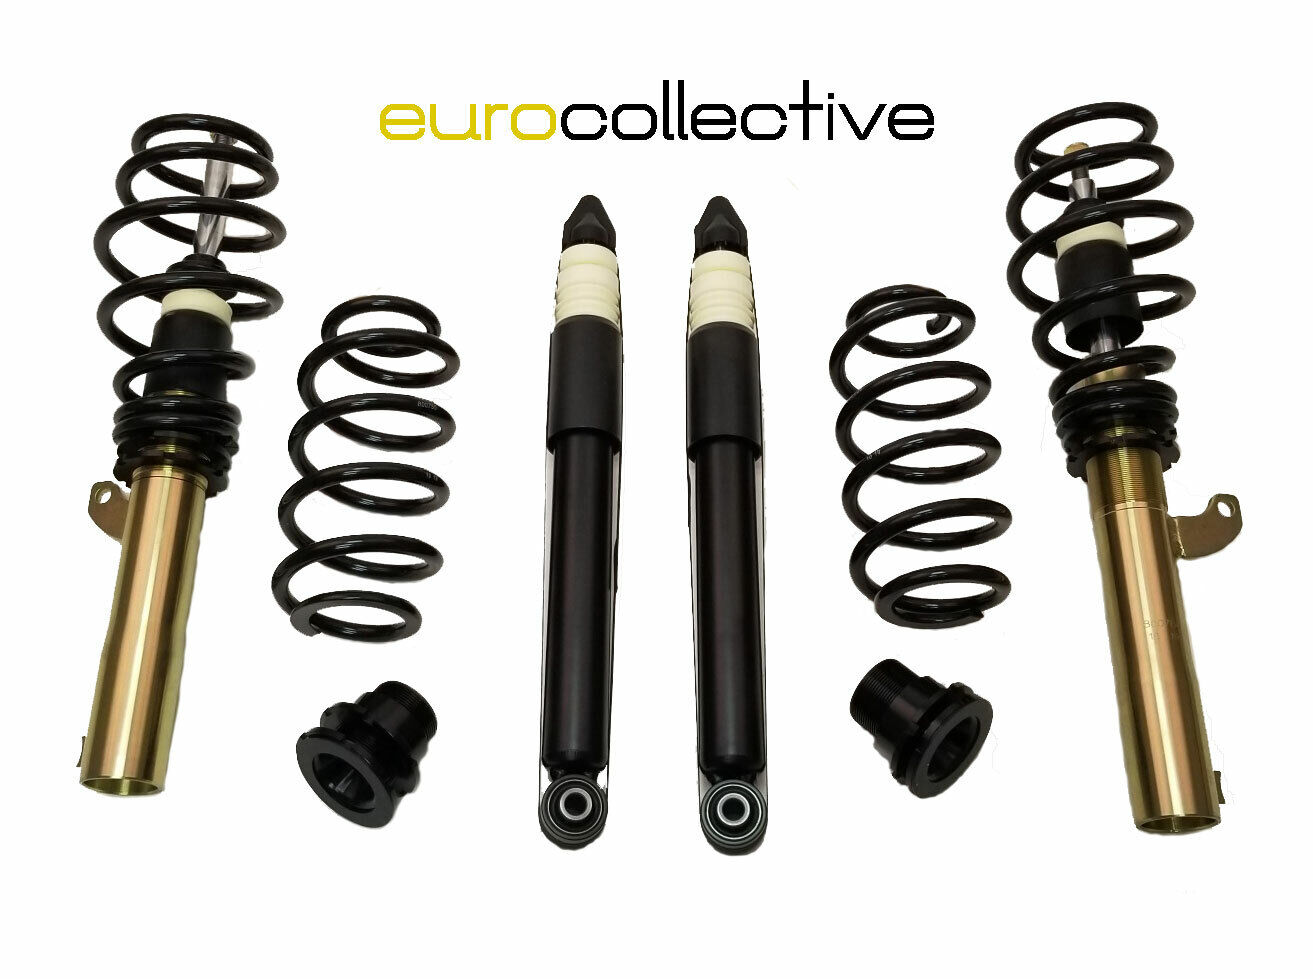 EuroCollective Coilovers for VW Golf Jetta MK5 & MK6 '05-'15 - Height Adjustable